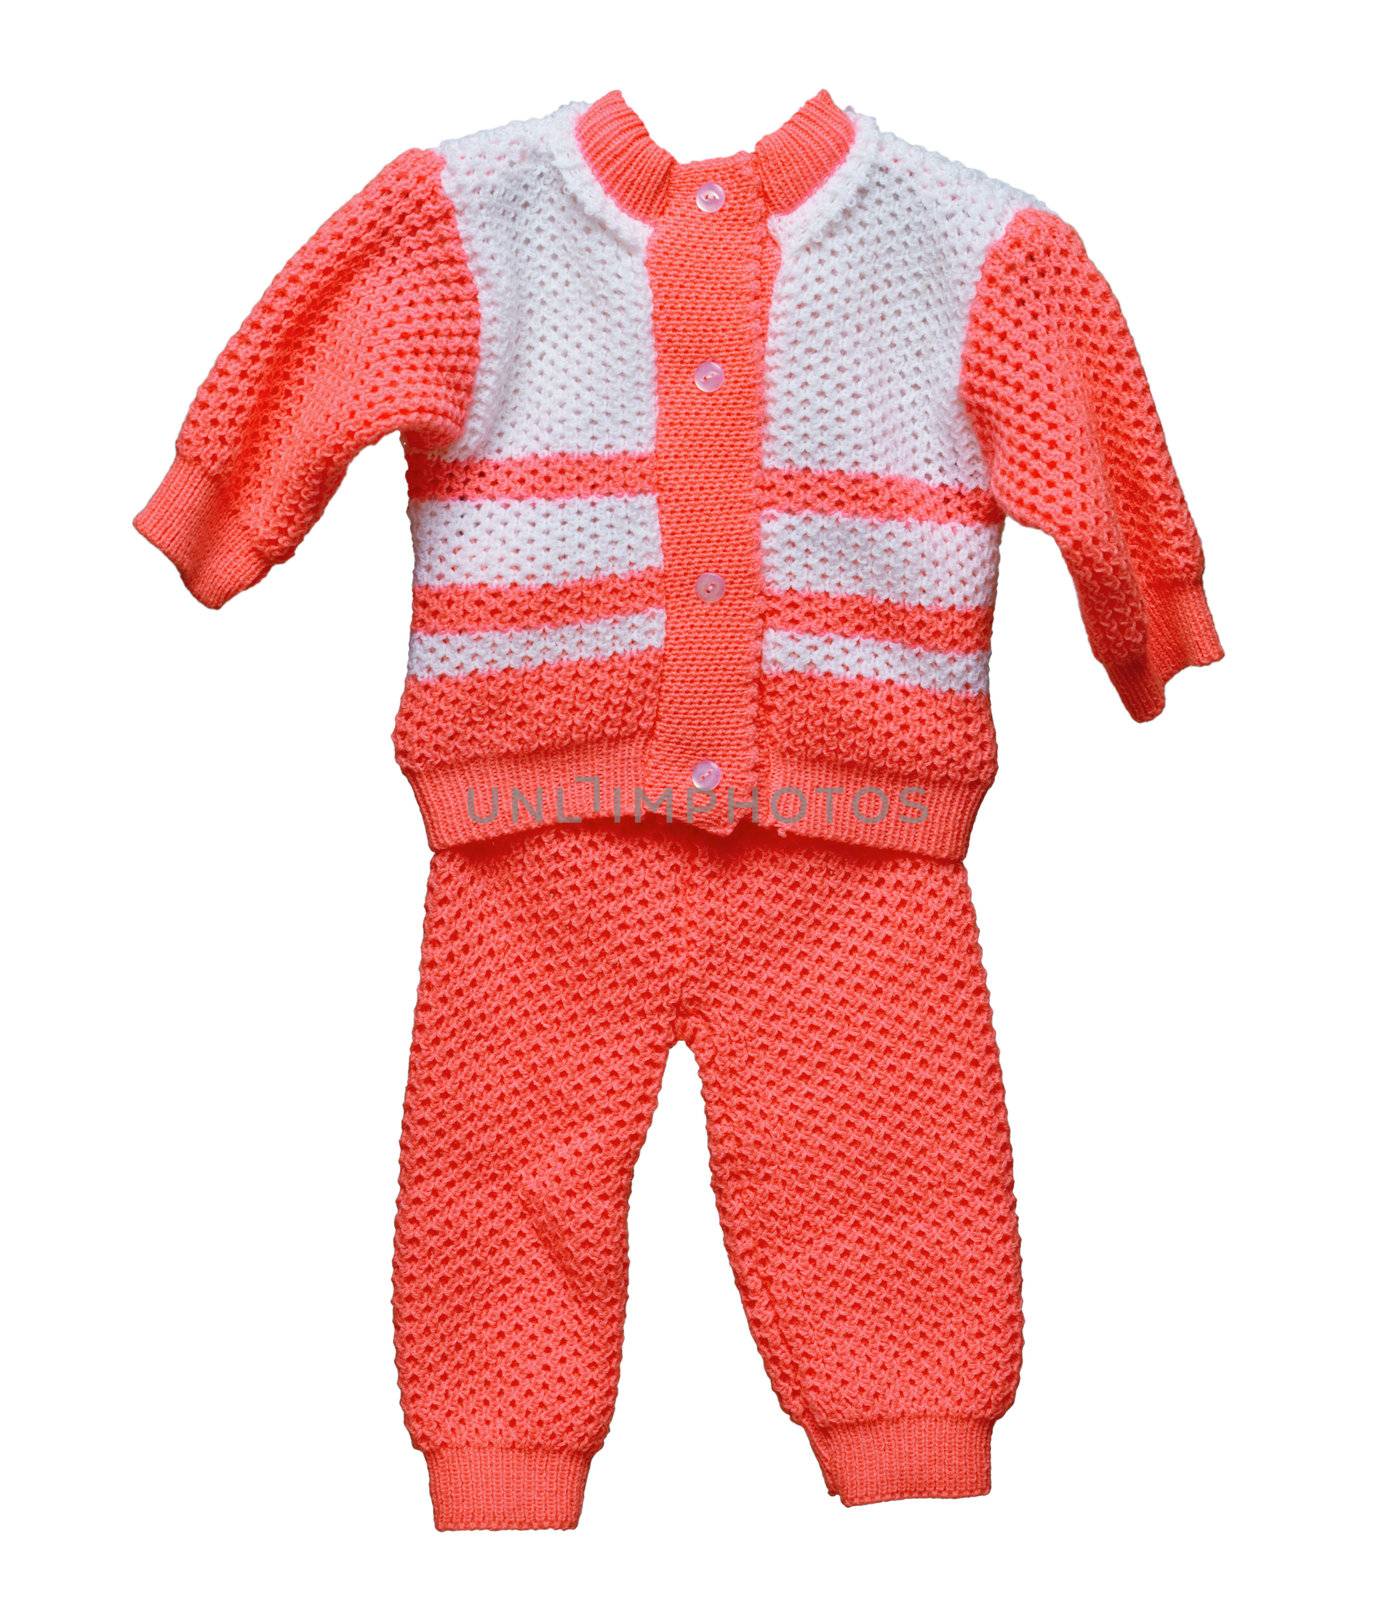 Knitted wool overalls for baby on white by pzaxe